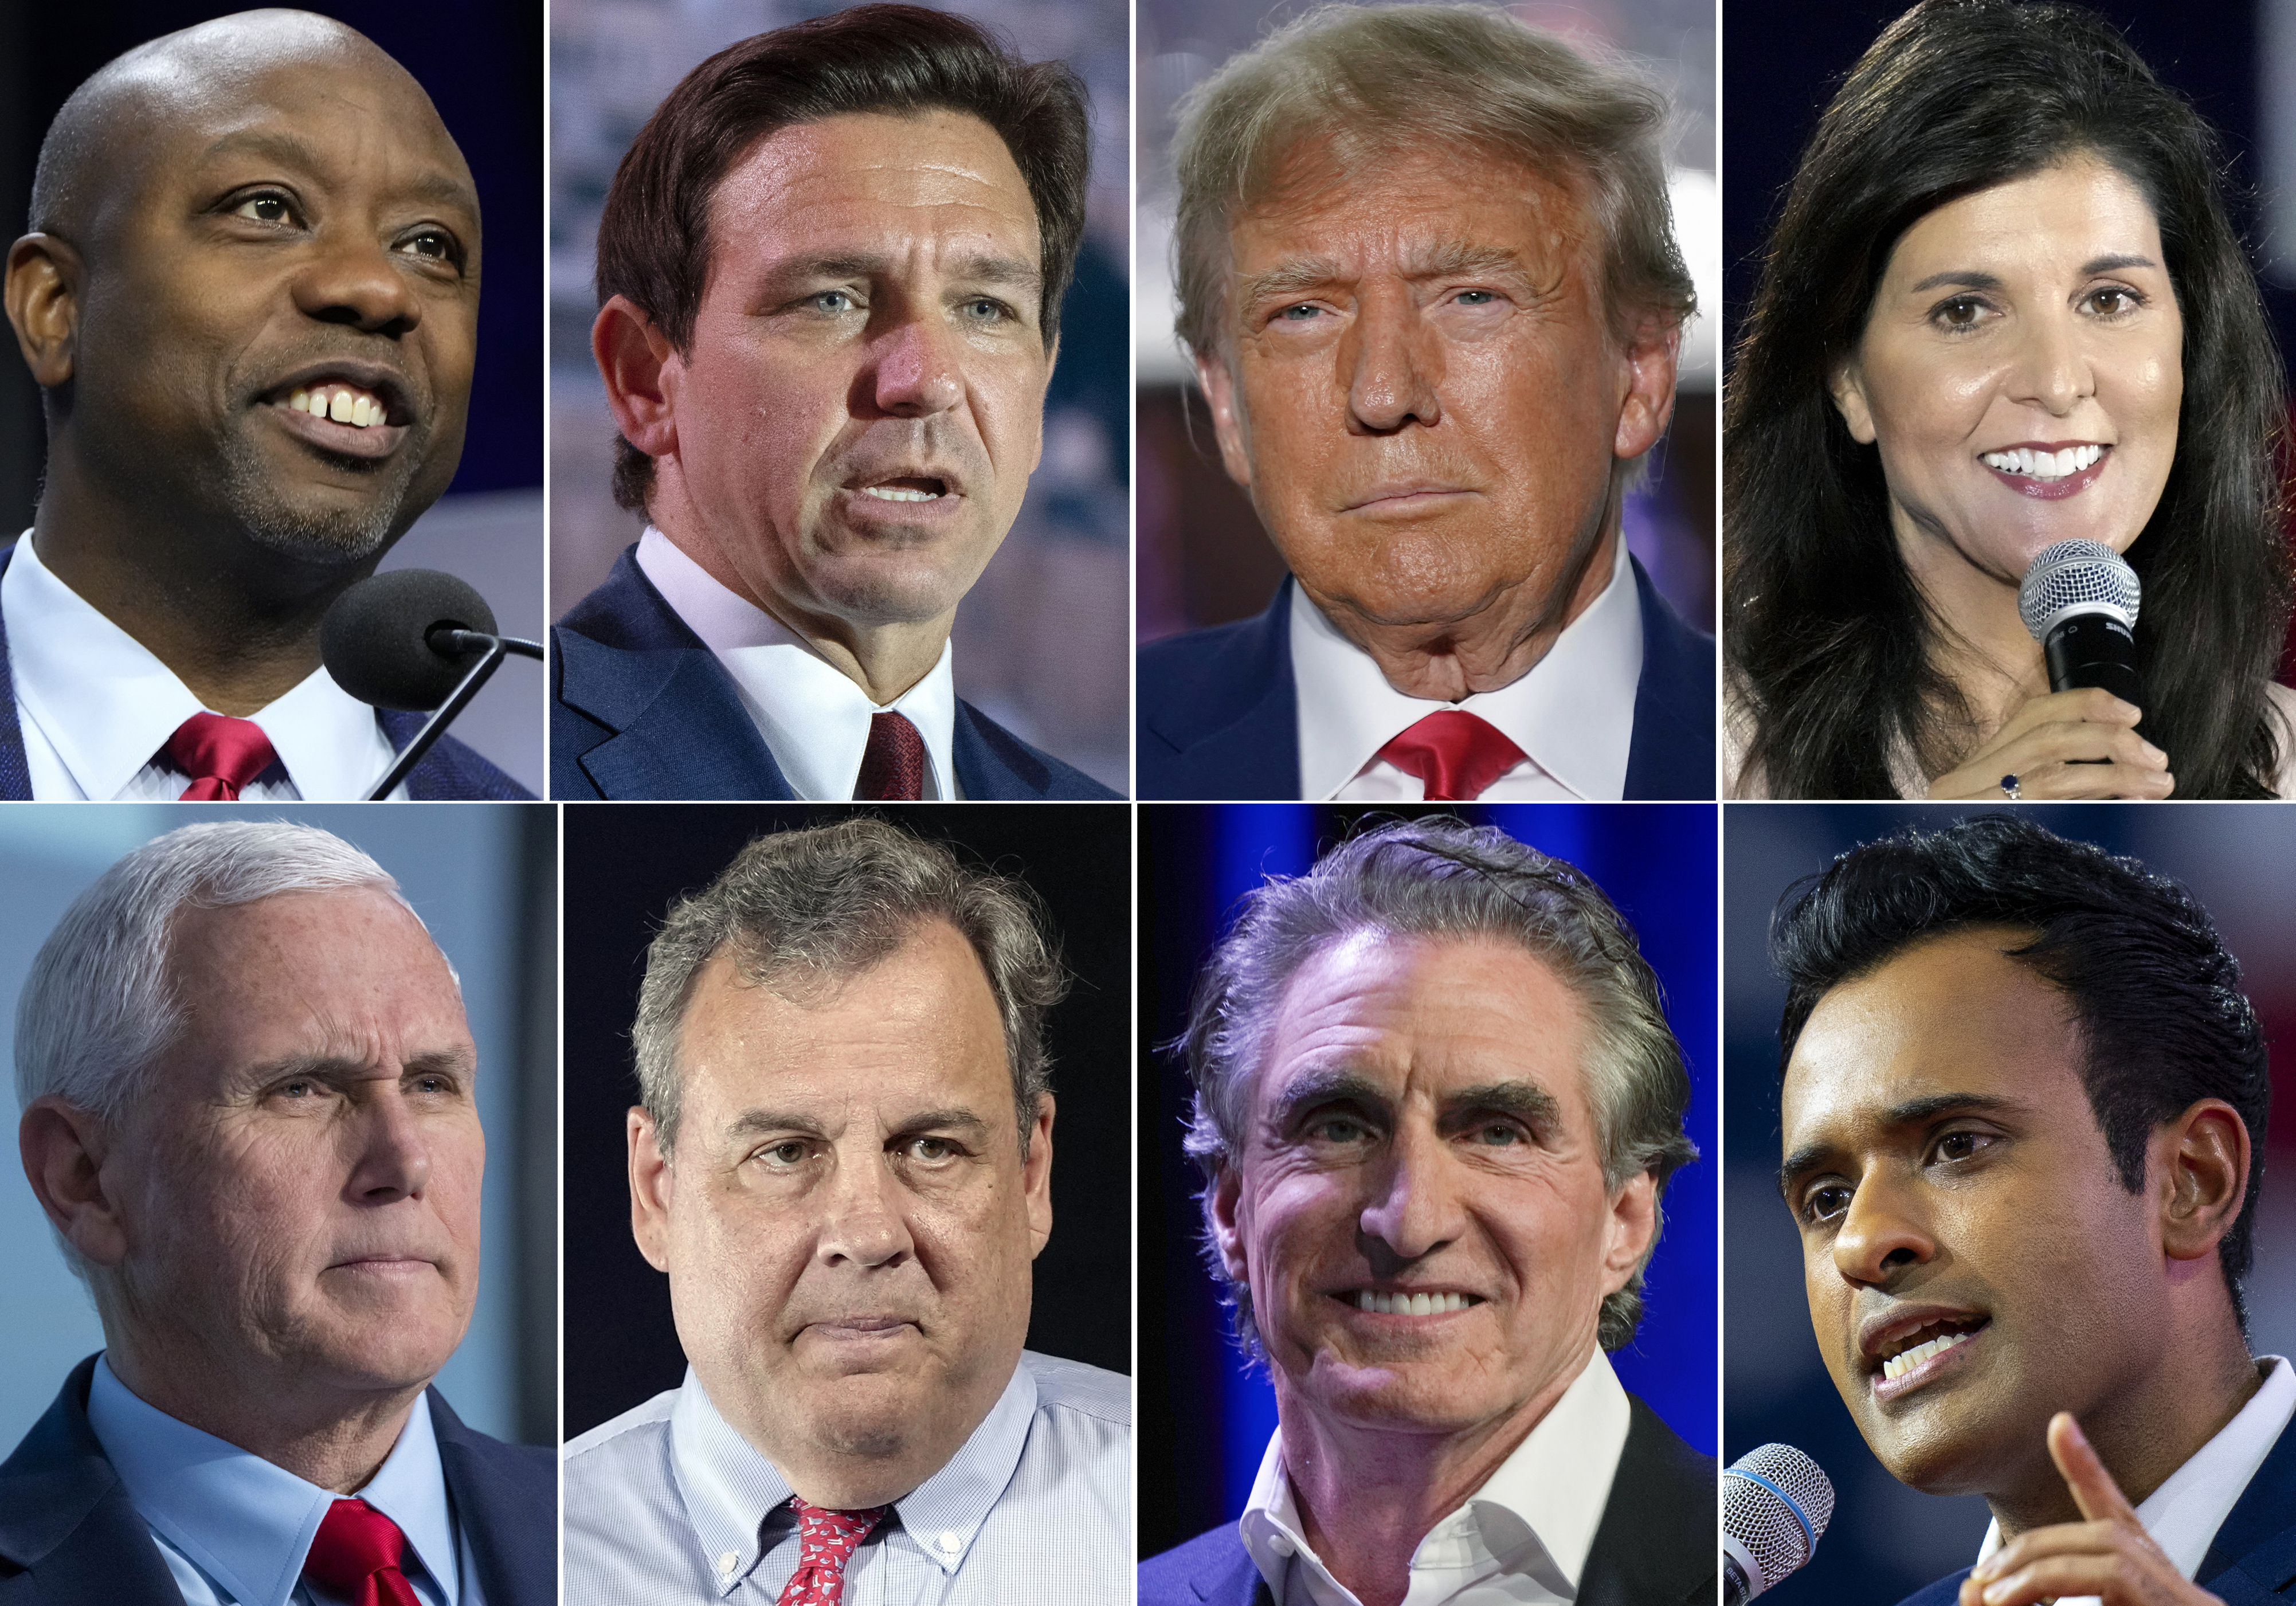 US presidential election 2024: Who are the candidates?